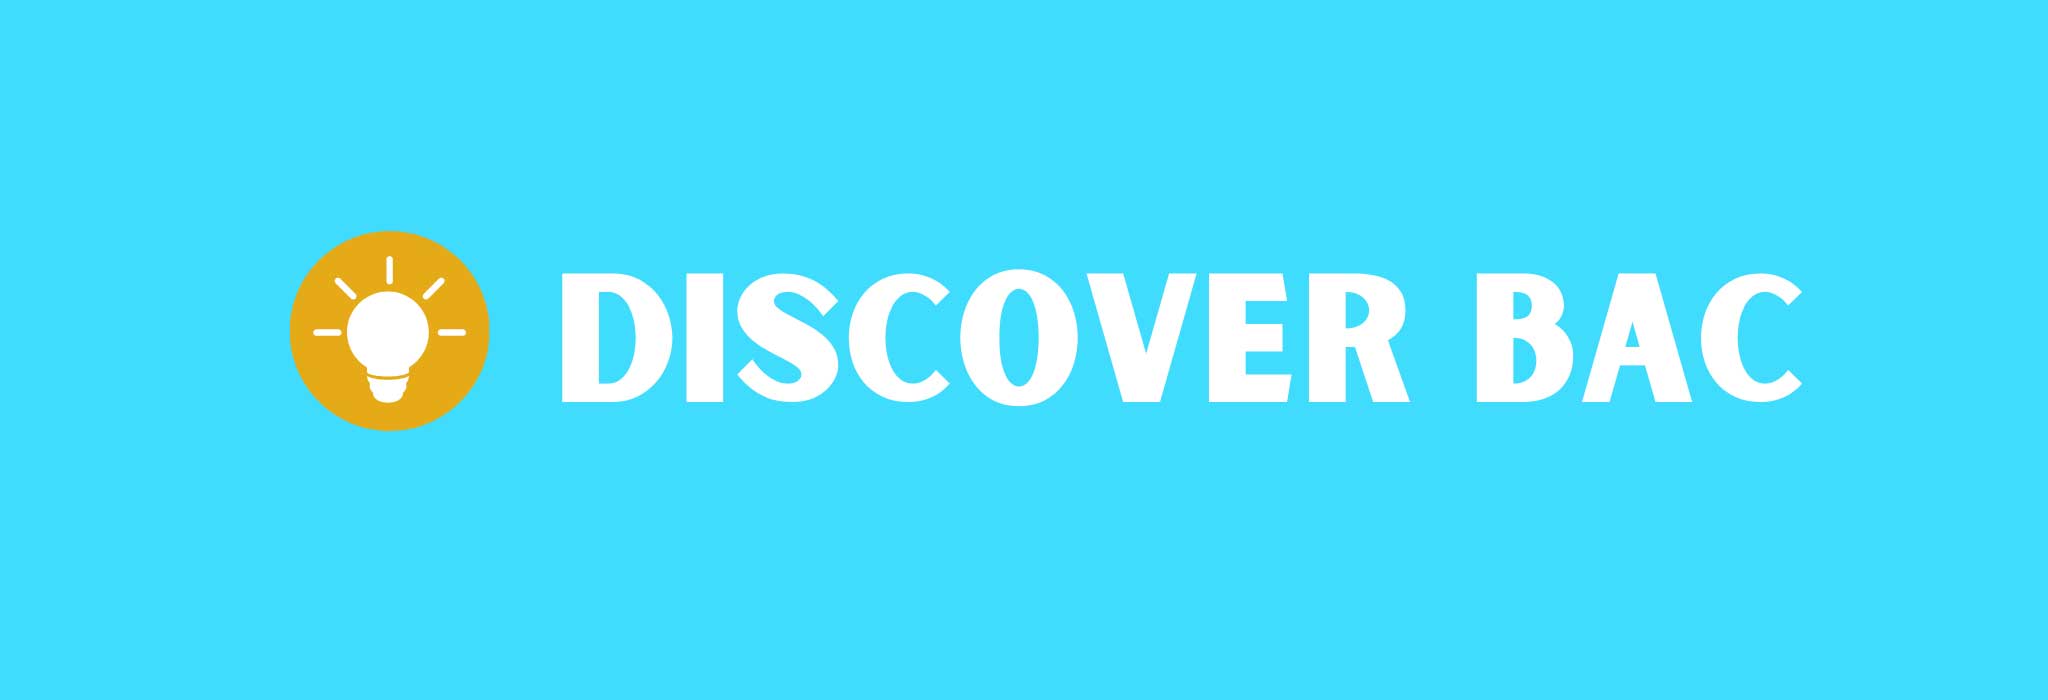 Discover BAC